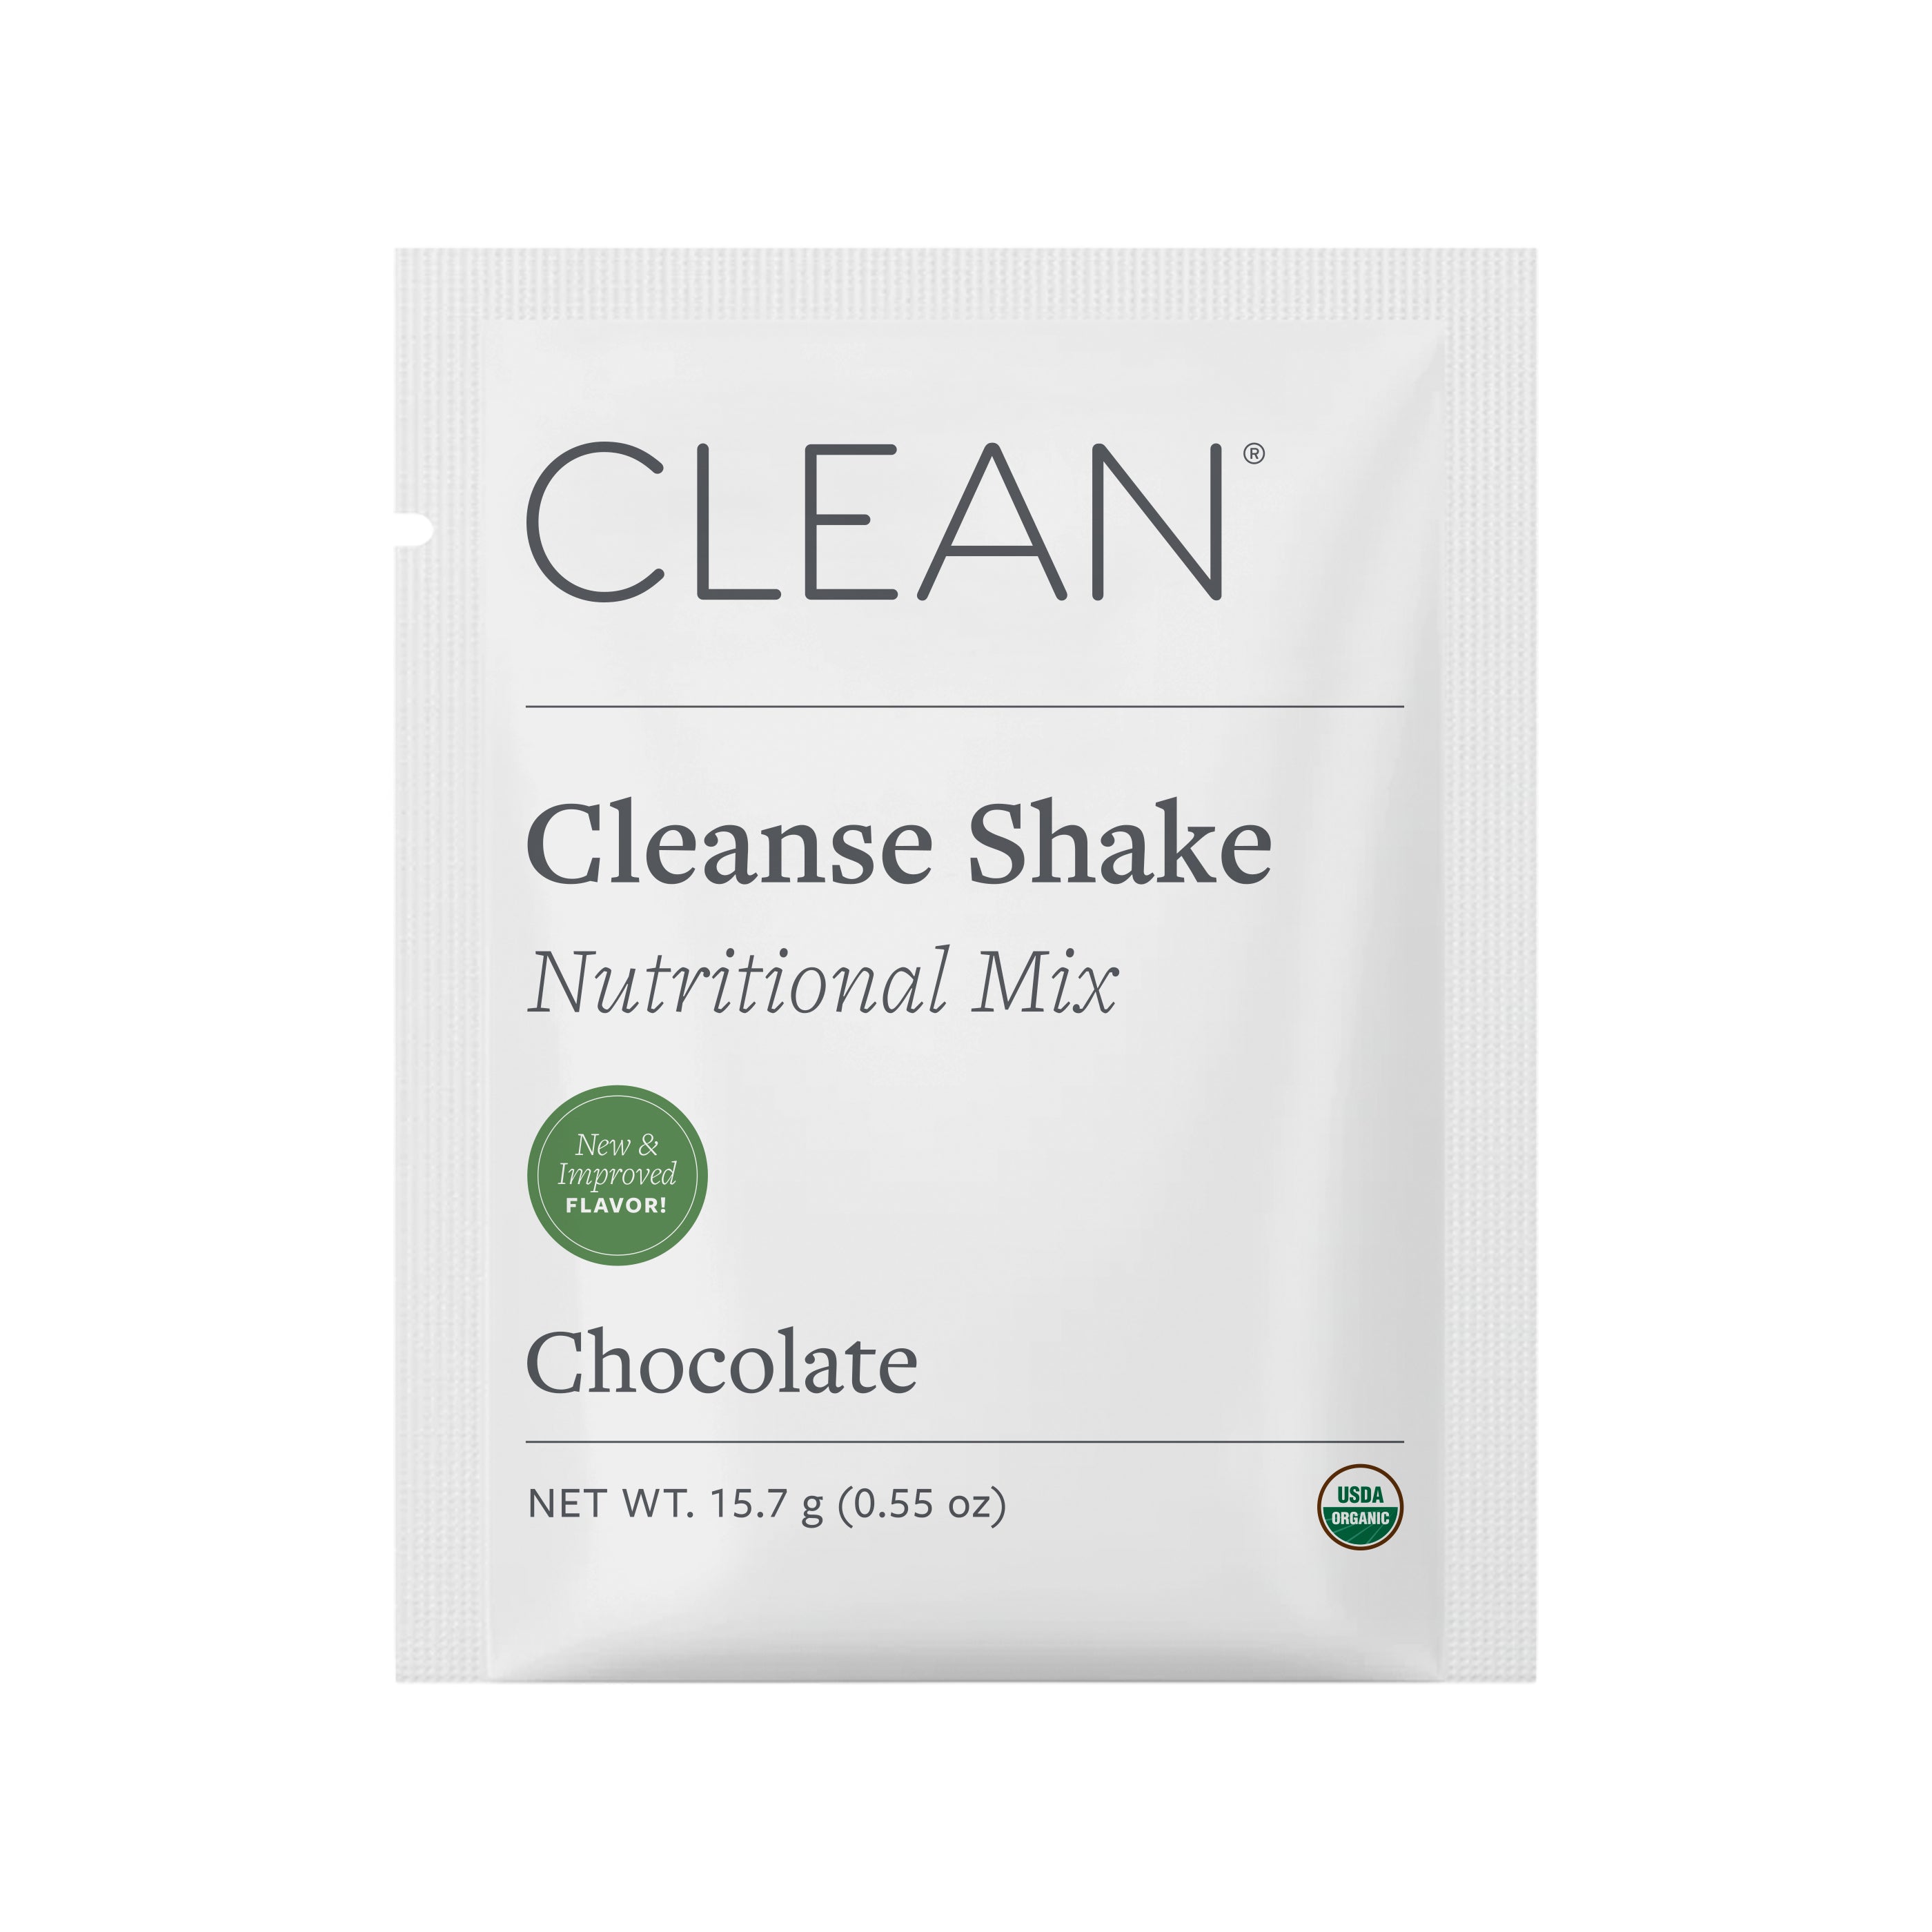 Cleanse Shake Packet